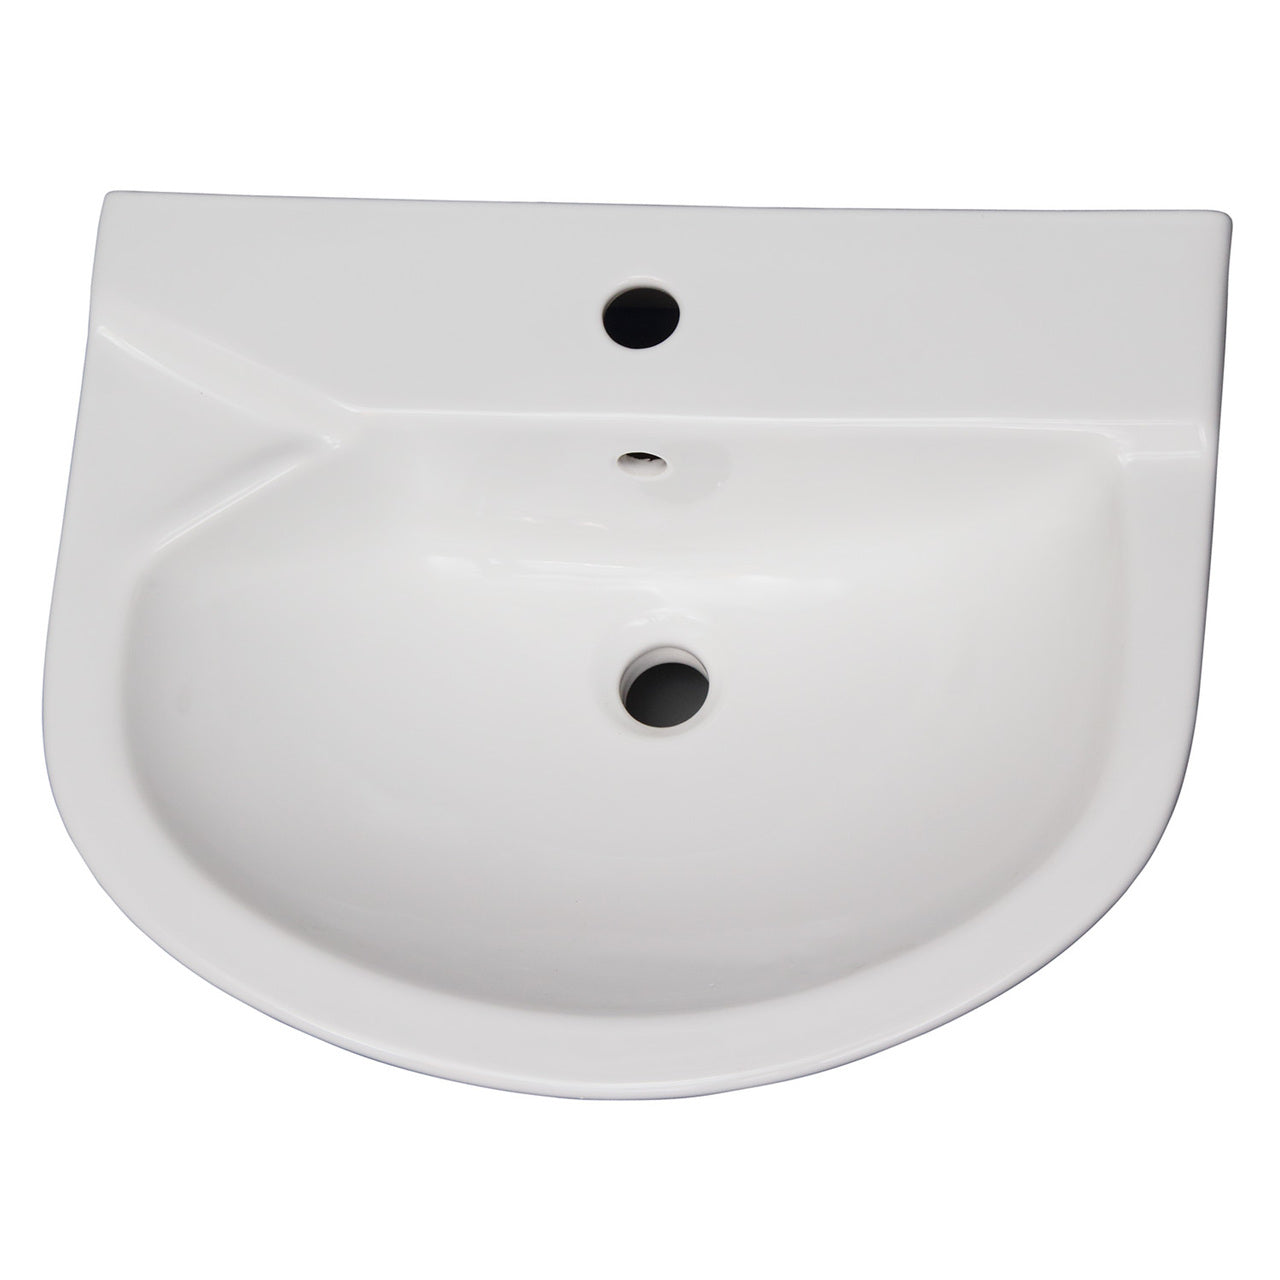 Anabel 555 Pedestal Bathroom Sink White for 1-Hole Faucet